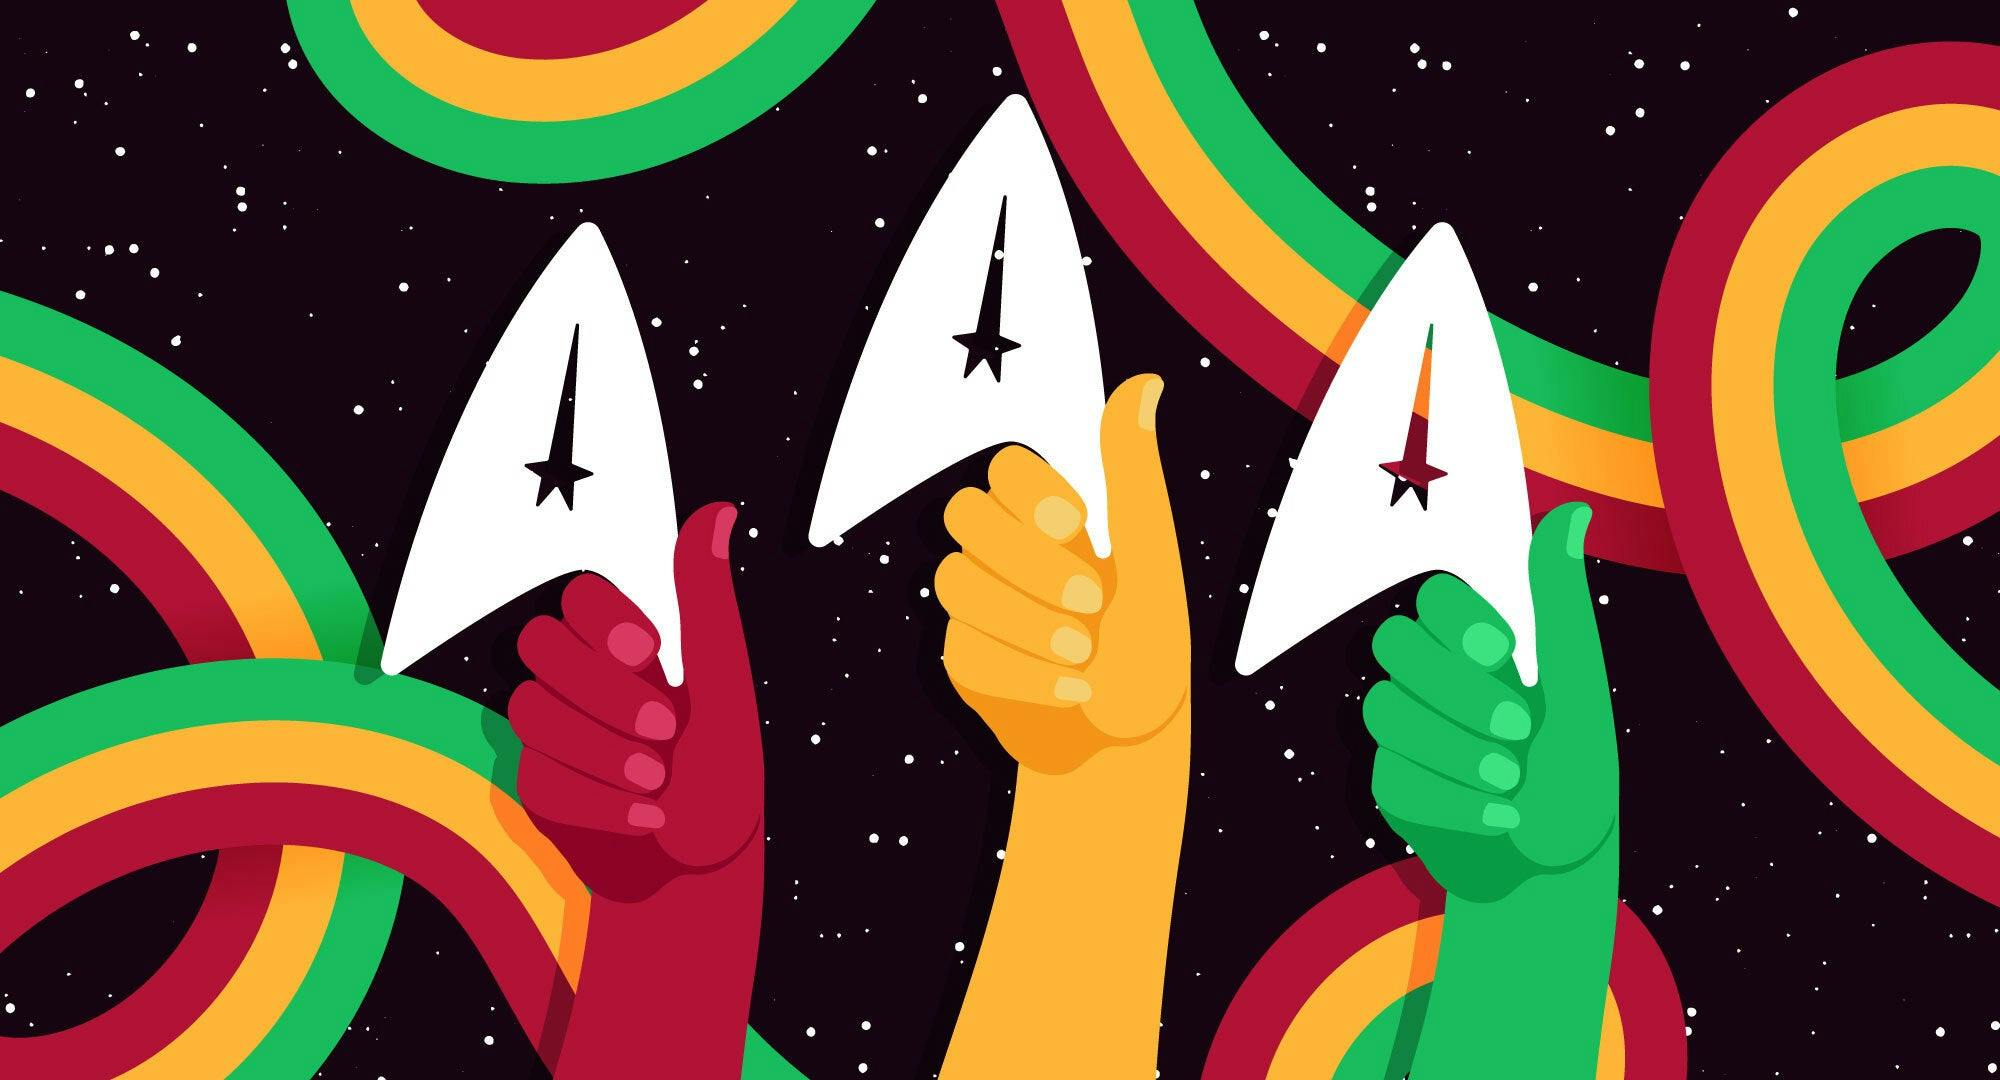 Illustrated banner featuring three hands (in red, yellow, and green) holding up the Star Trek delta